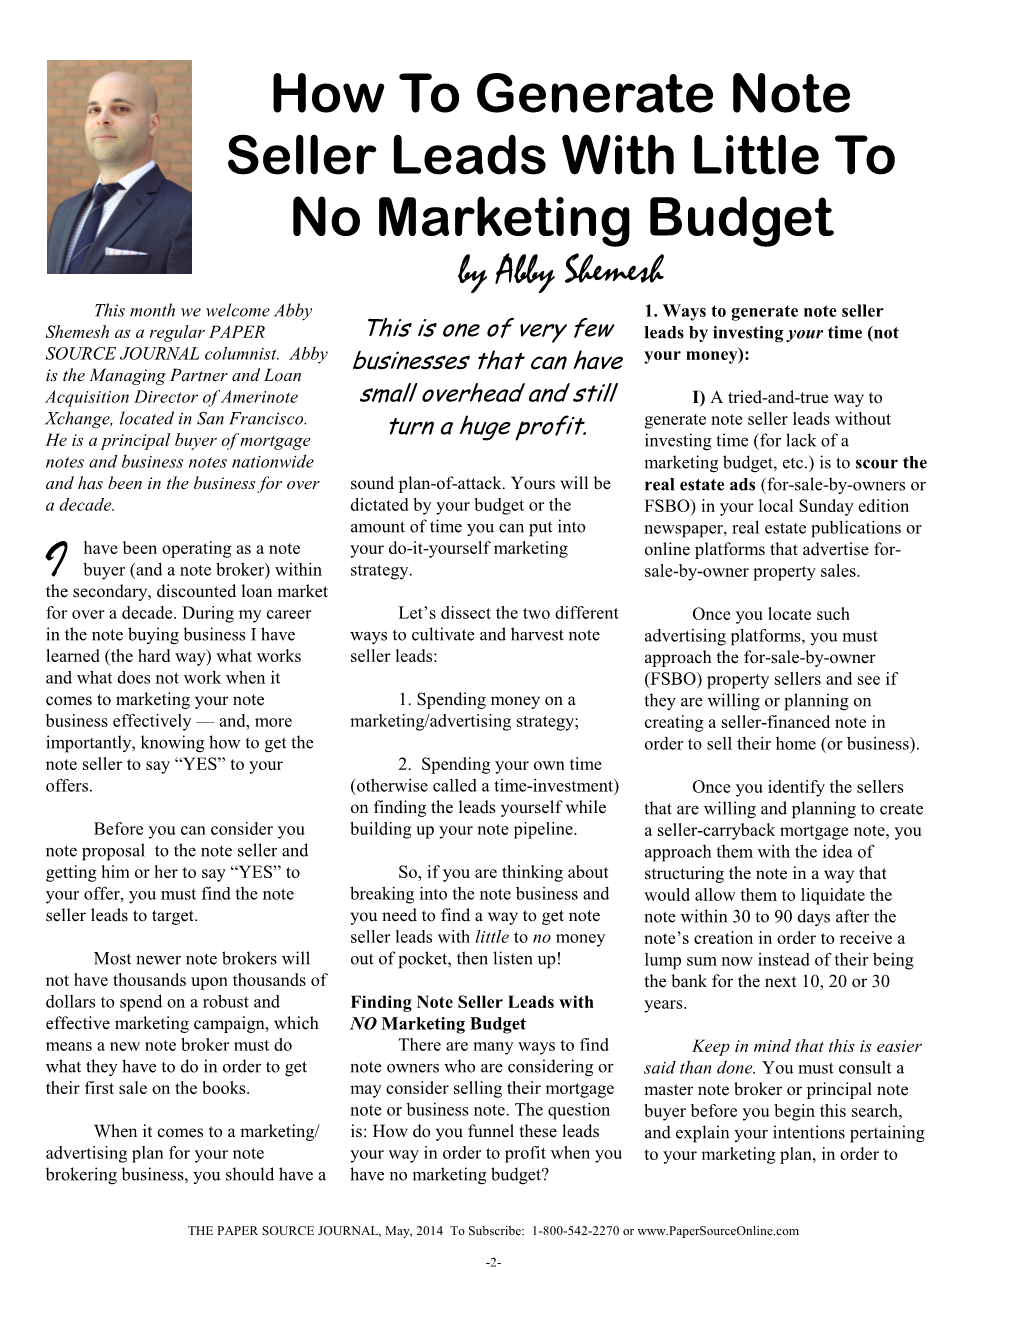 How to Generate Note Seller Leads with Little to No Marketing Budget by Abby Shemesh This Month We Welcome Abby 1